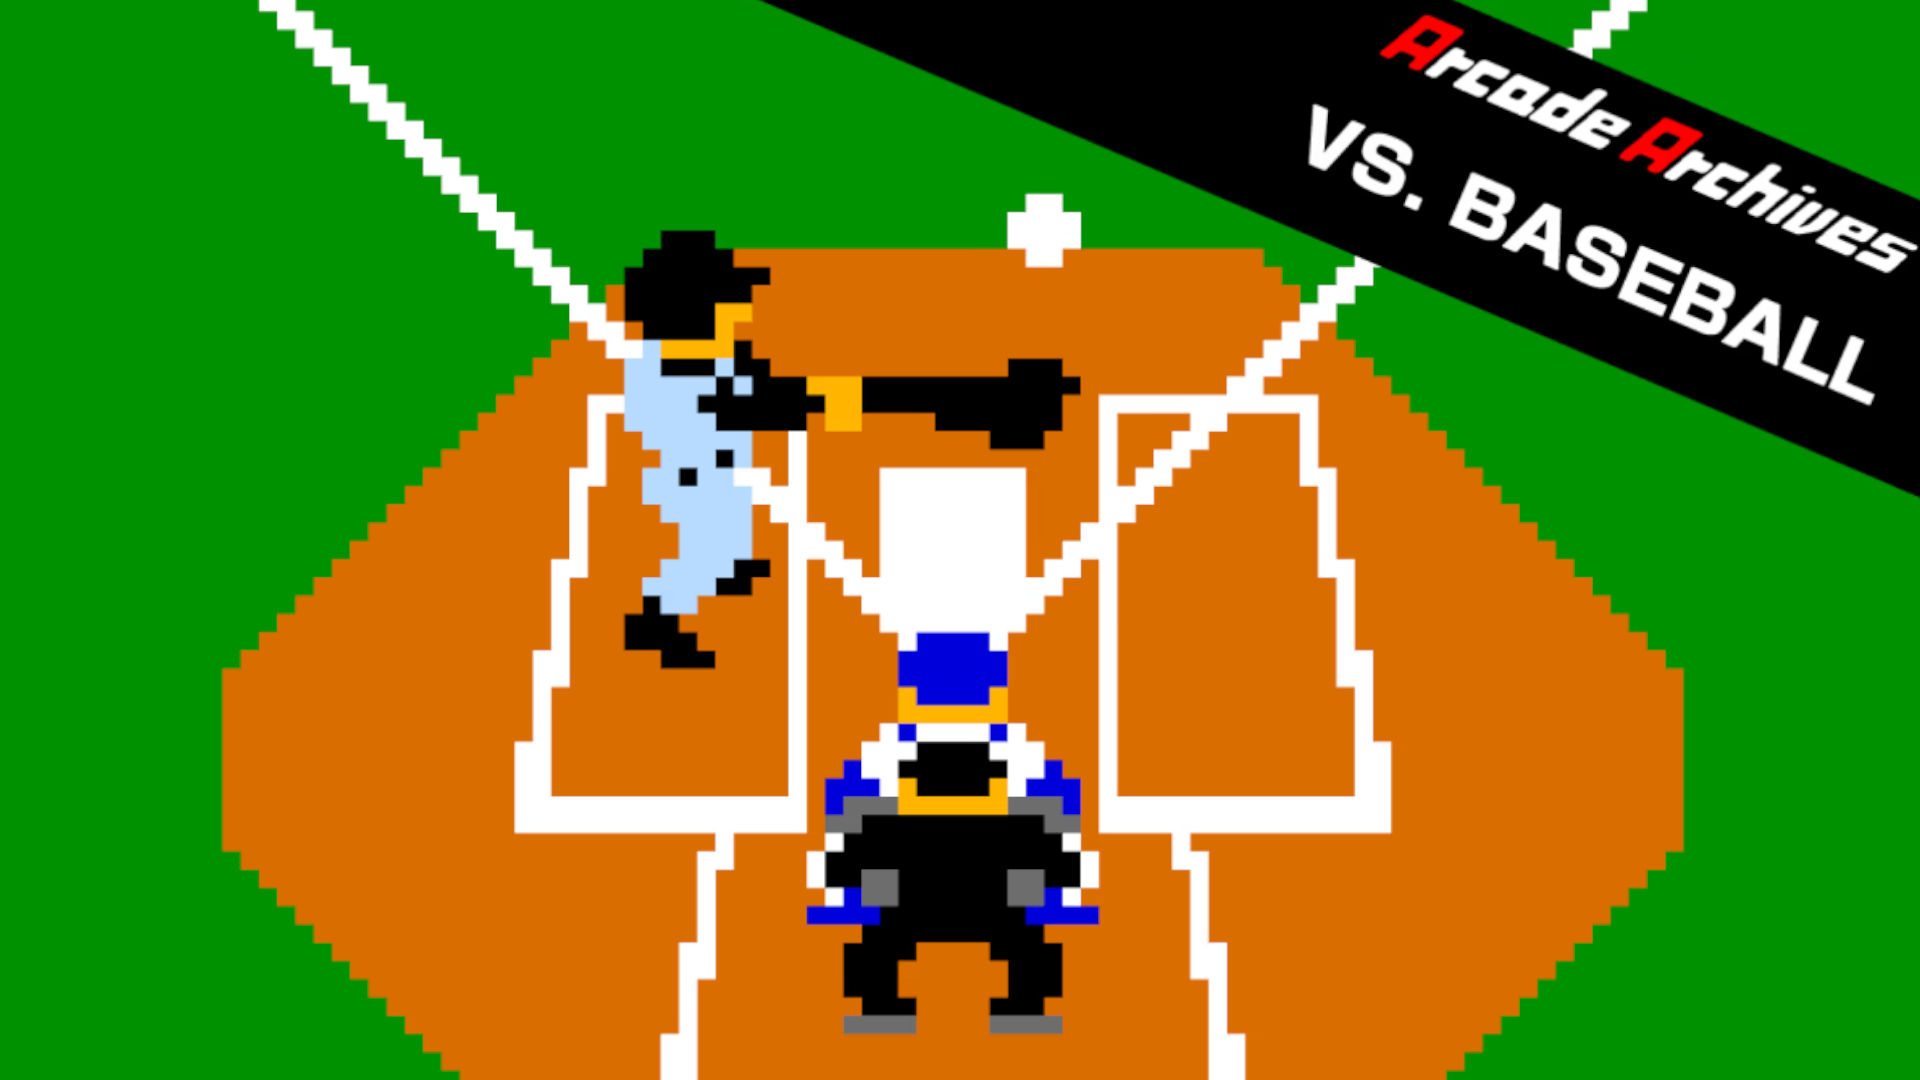 Cover for Arcade Archives VS Baseball, one of the Arcade Archives baseball games in the collection